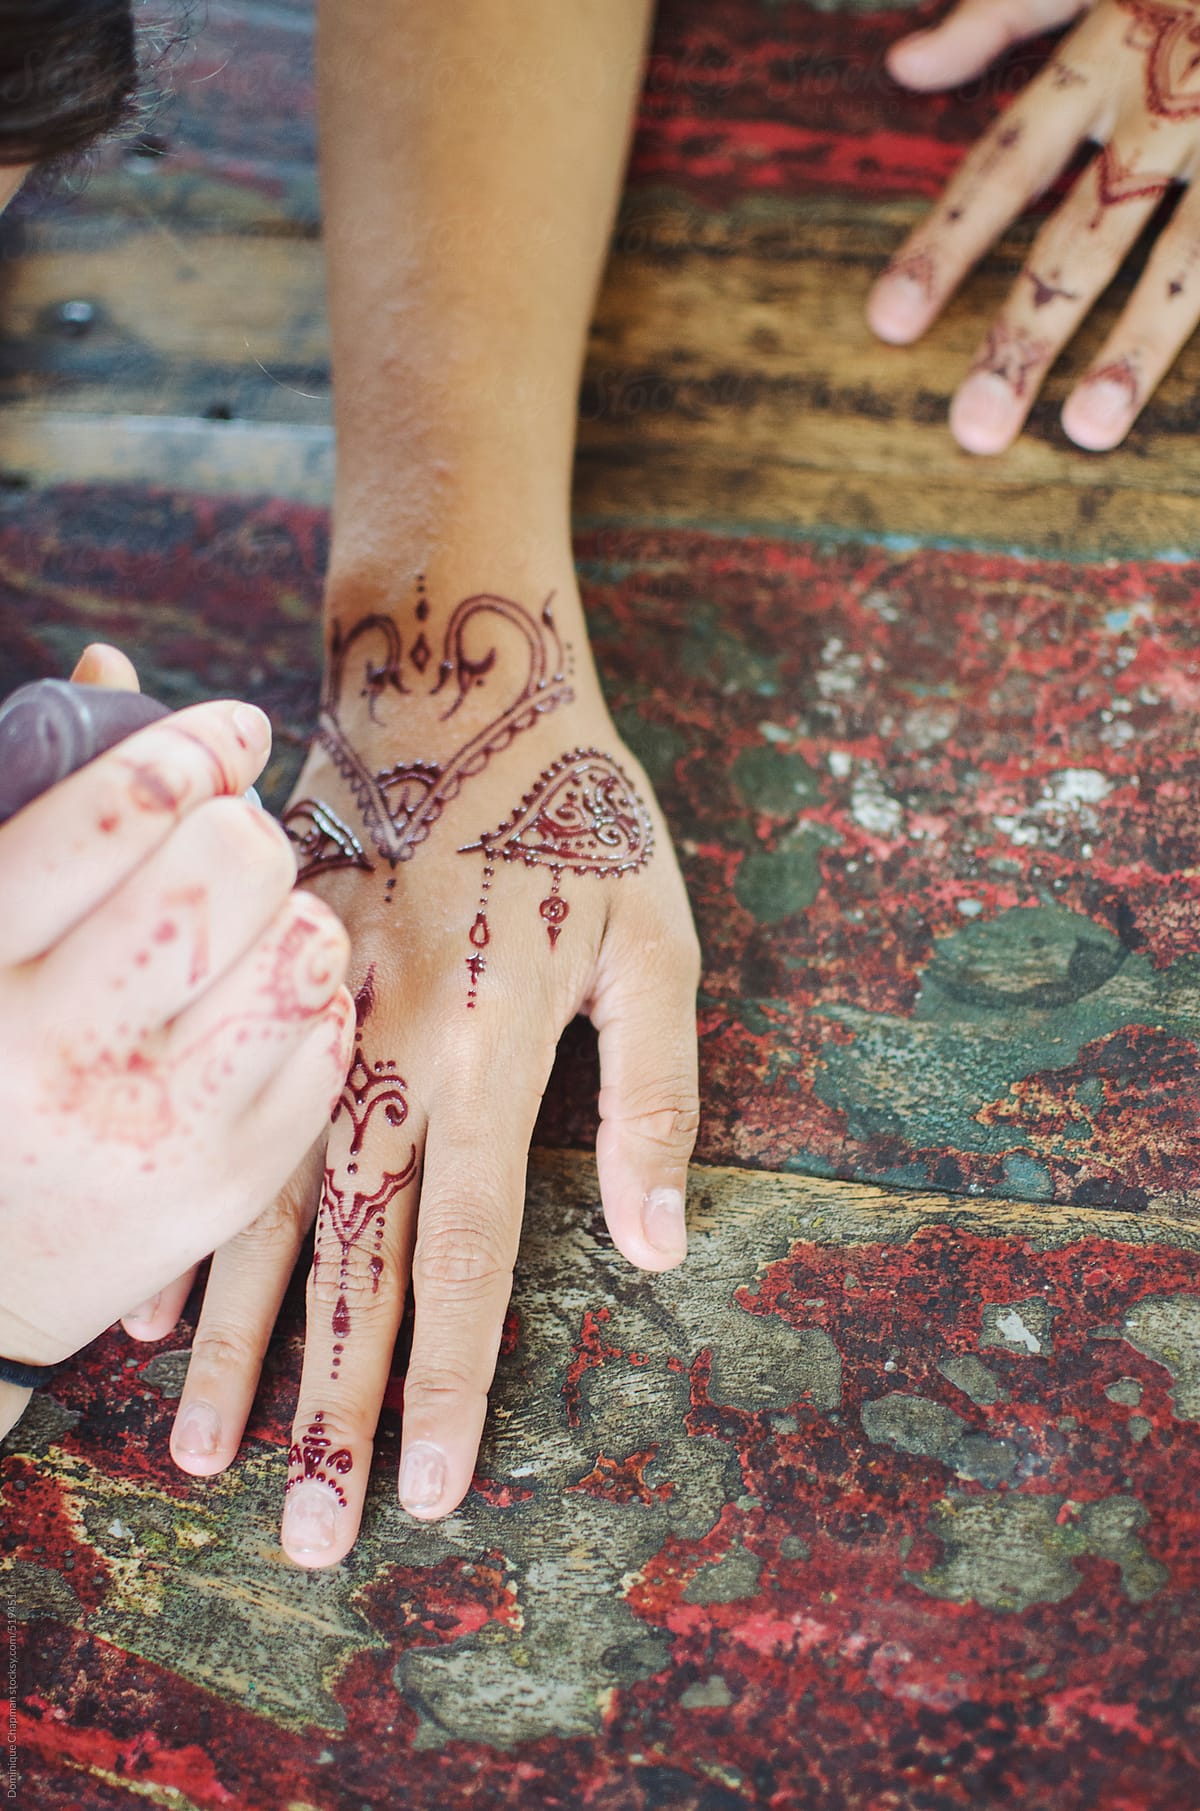 Henna tattoo being painted on hands